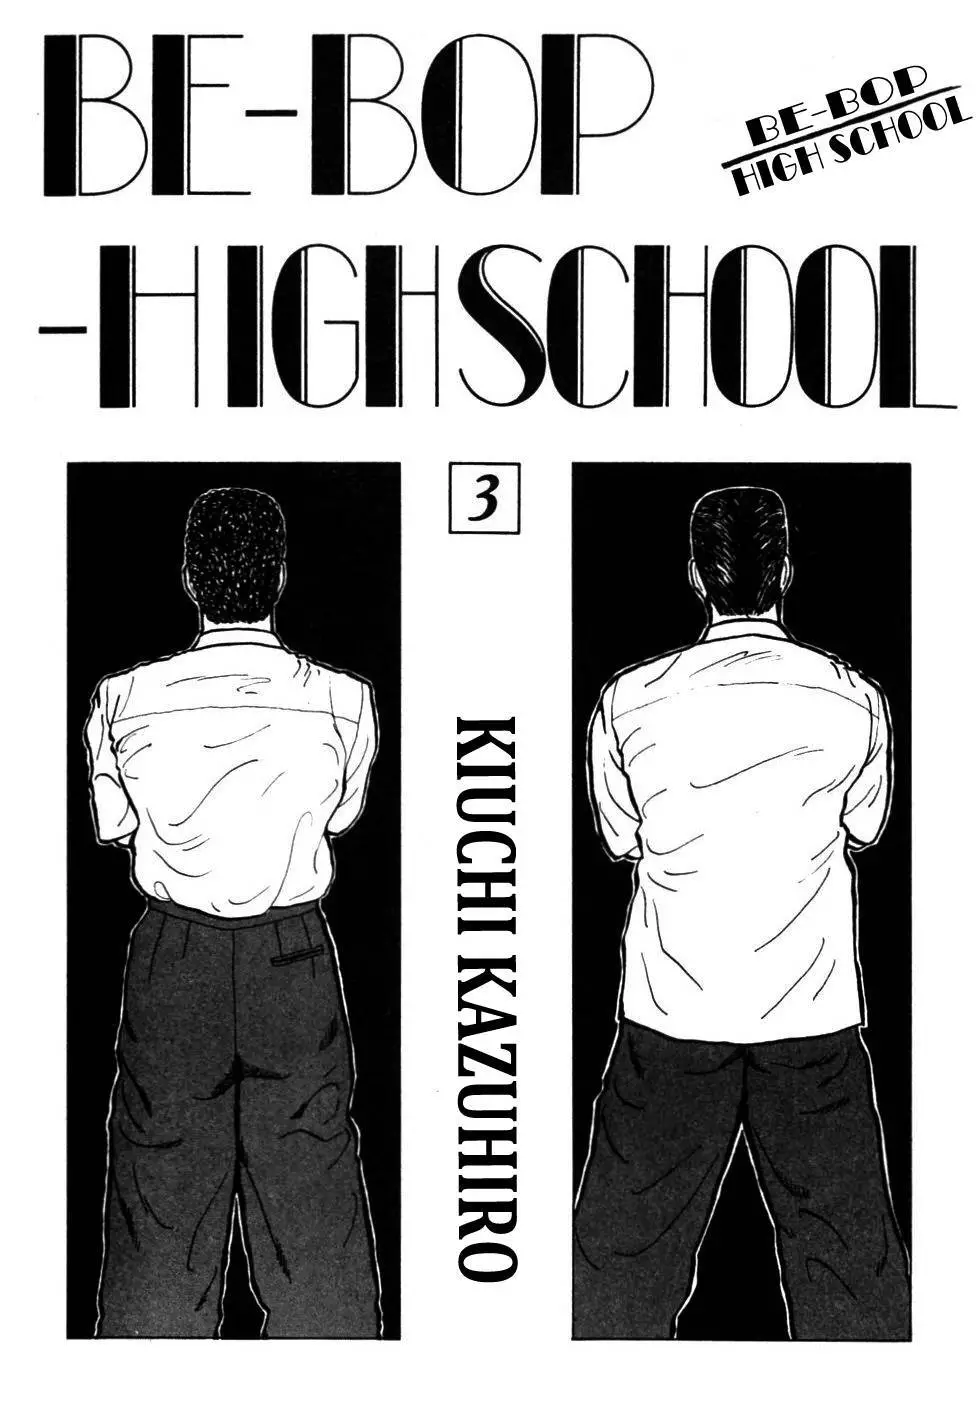 Be-Bop High School - 22 page p_00004